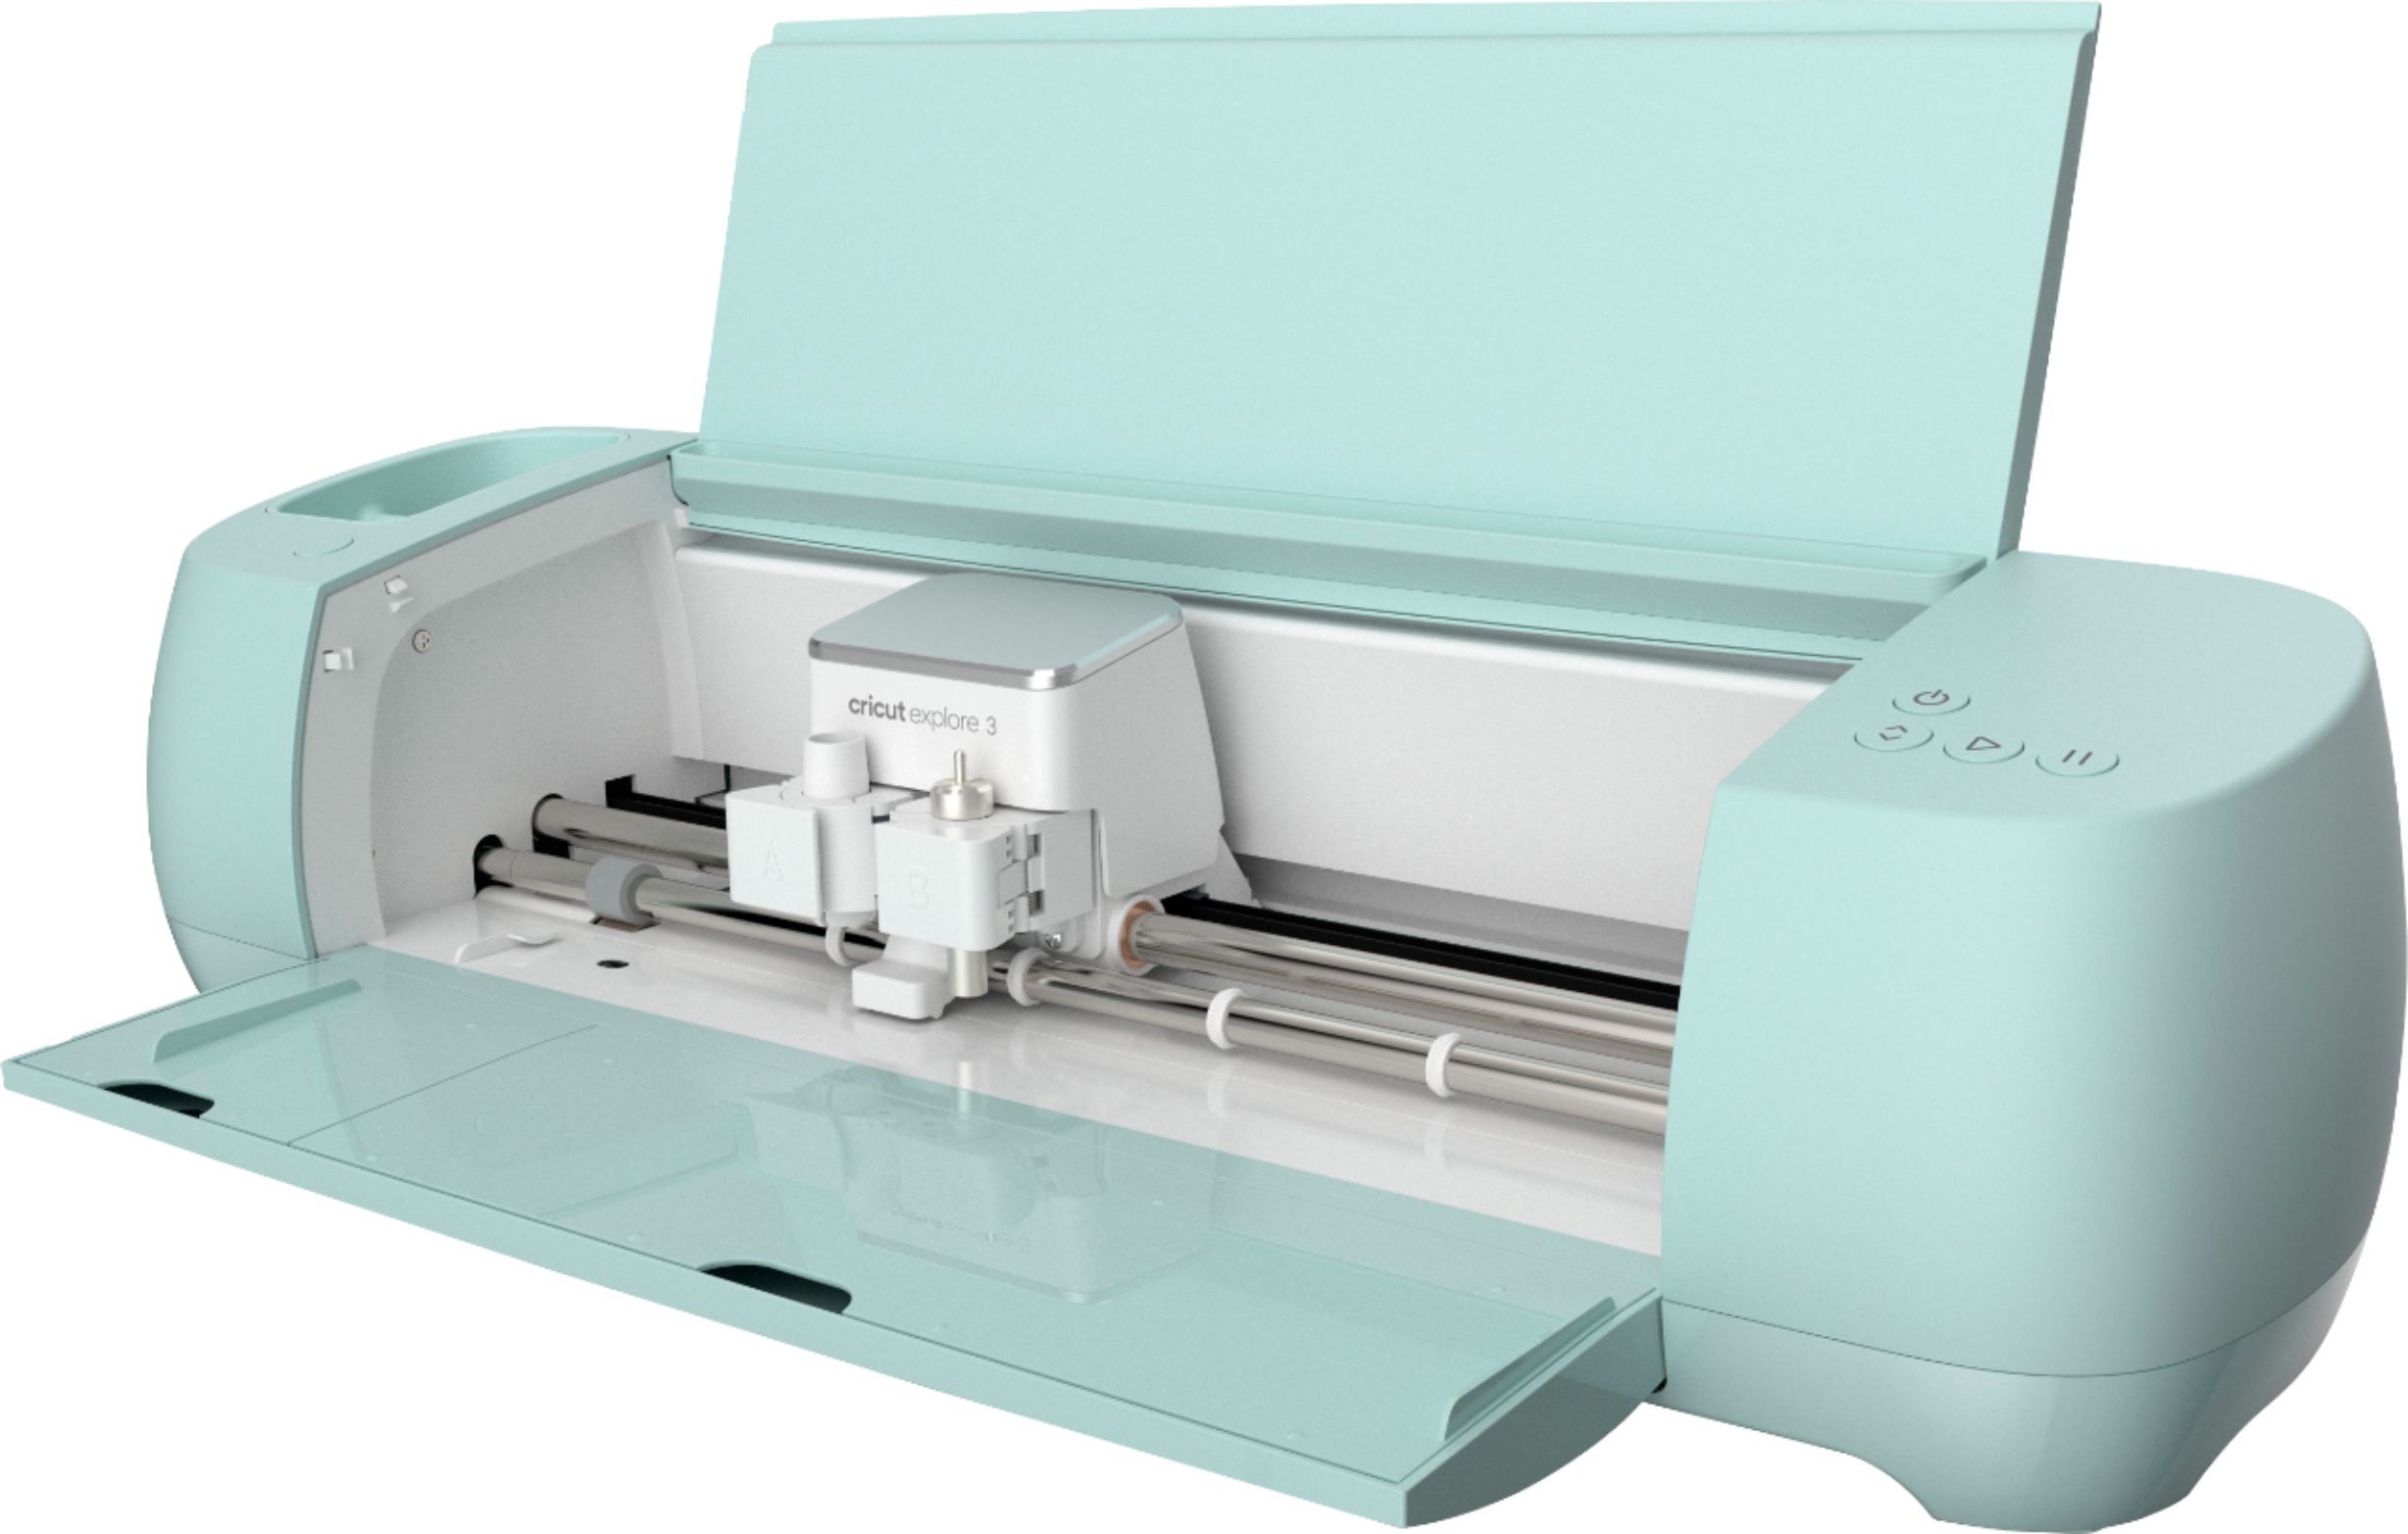 Cricut Explore 3 review: Smarter, faster and potentially costly - CNET